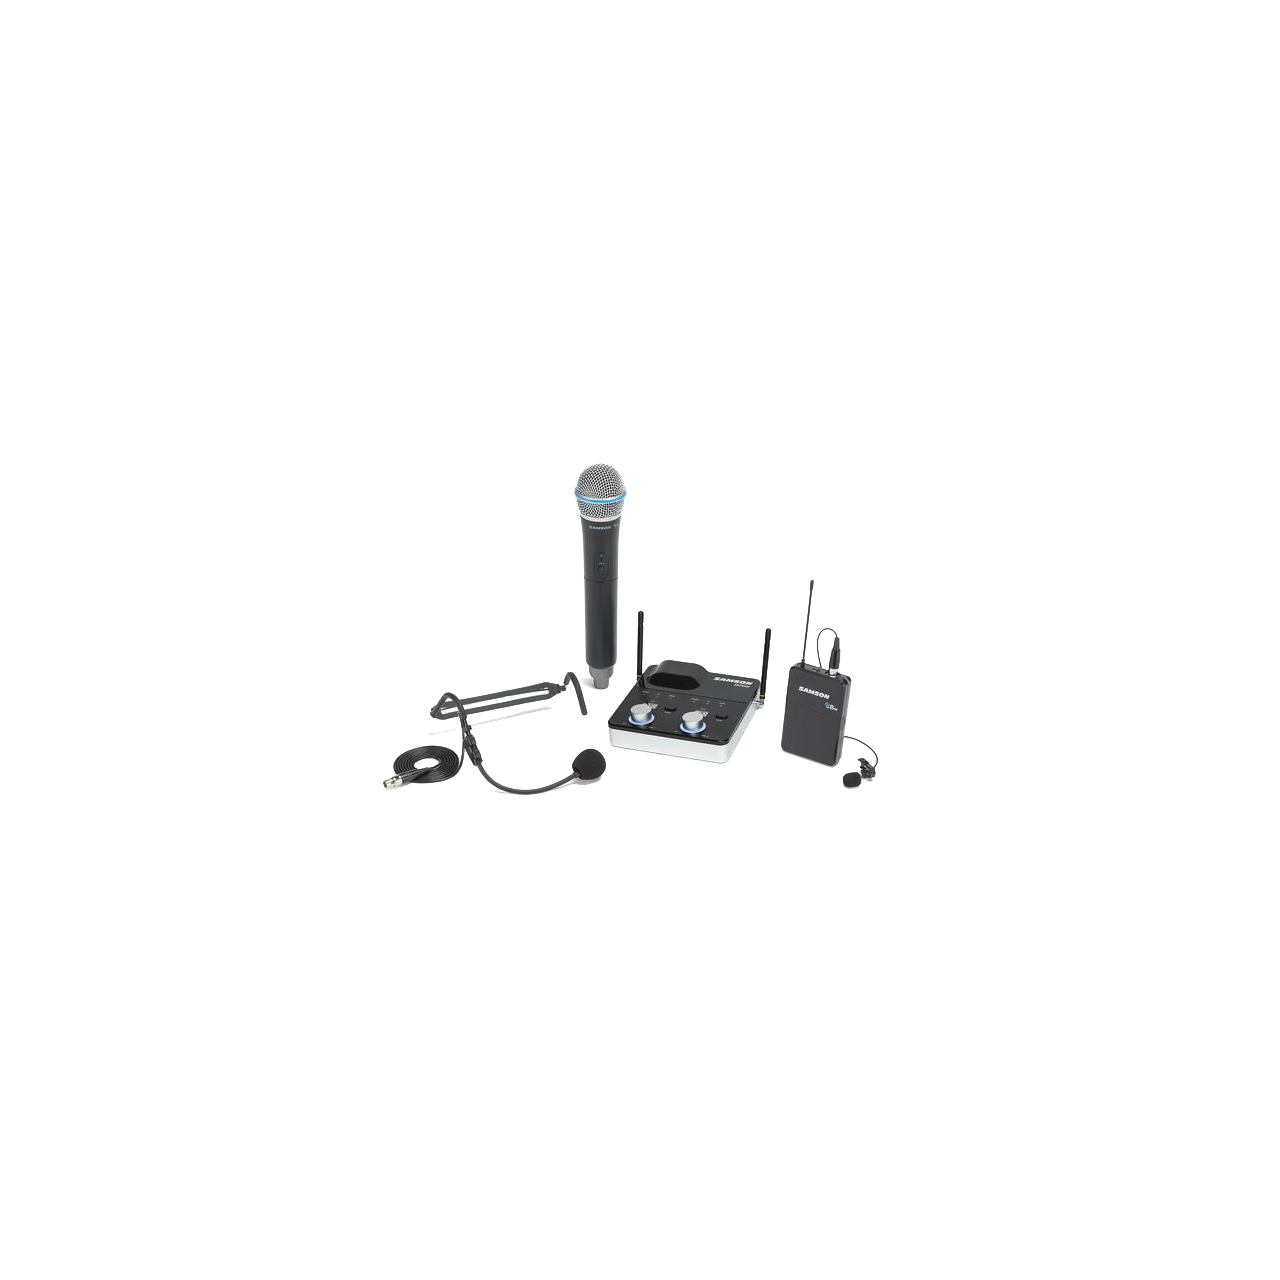 Samson Concert 288m All-In-One Wireless System